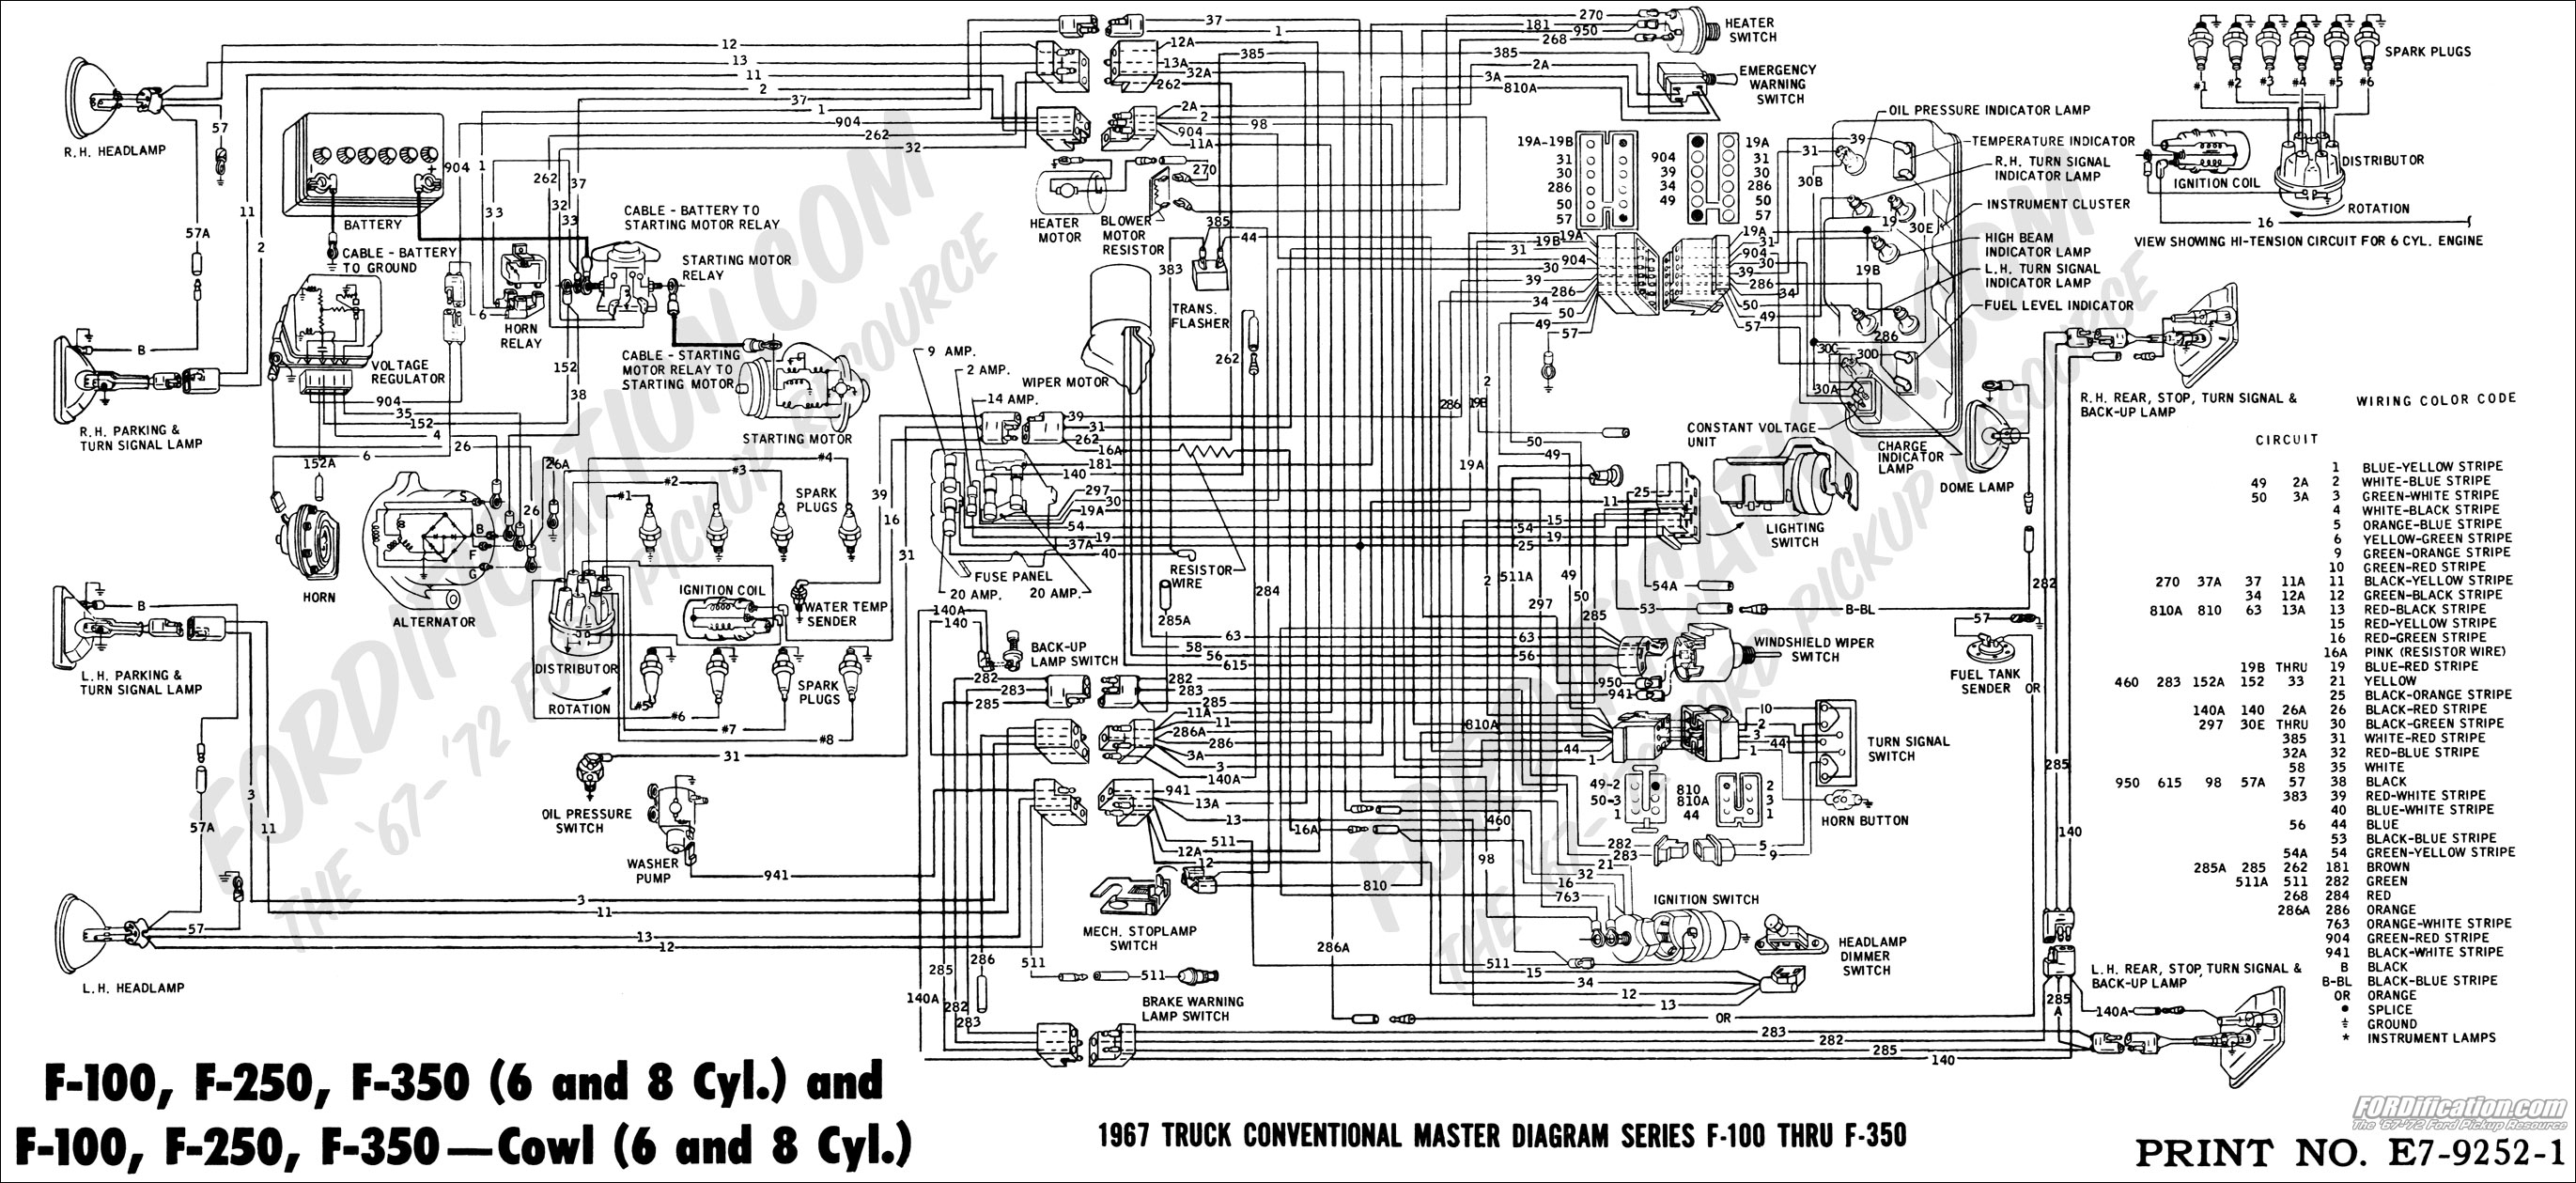 Ford Wiring Diagrams Ford Wire Diagrams Wiring Diagram